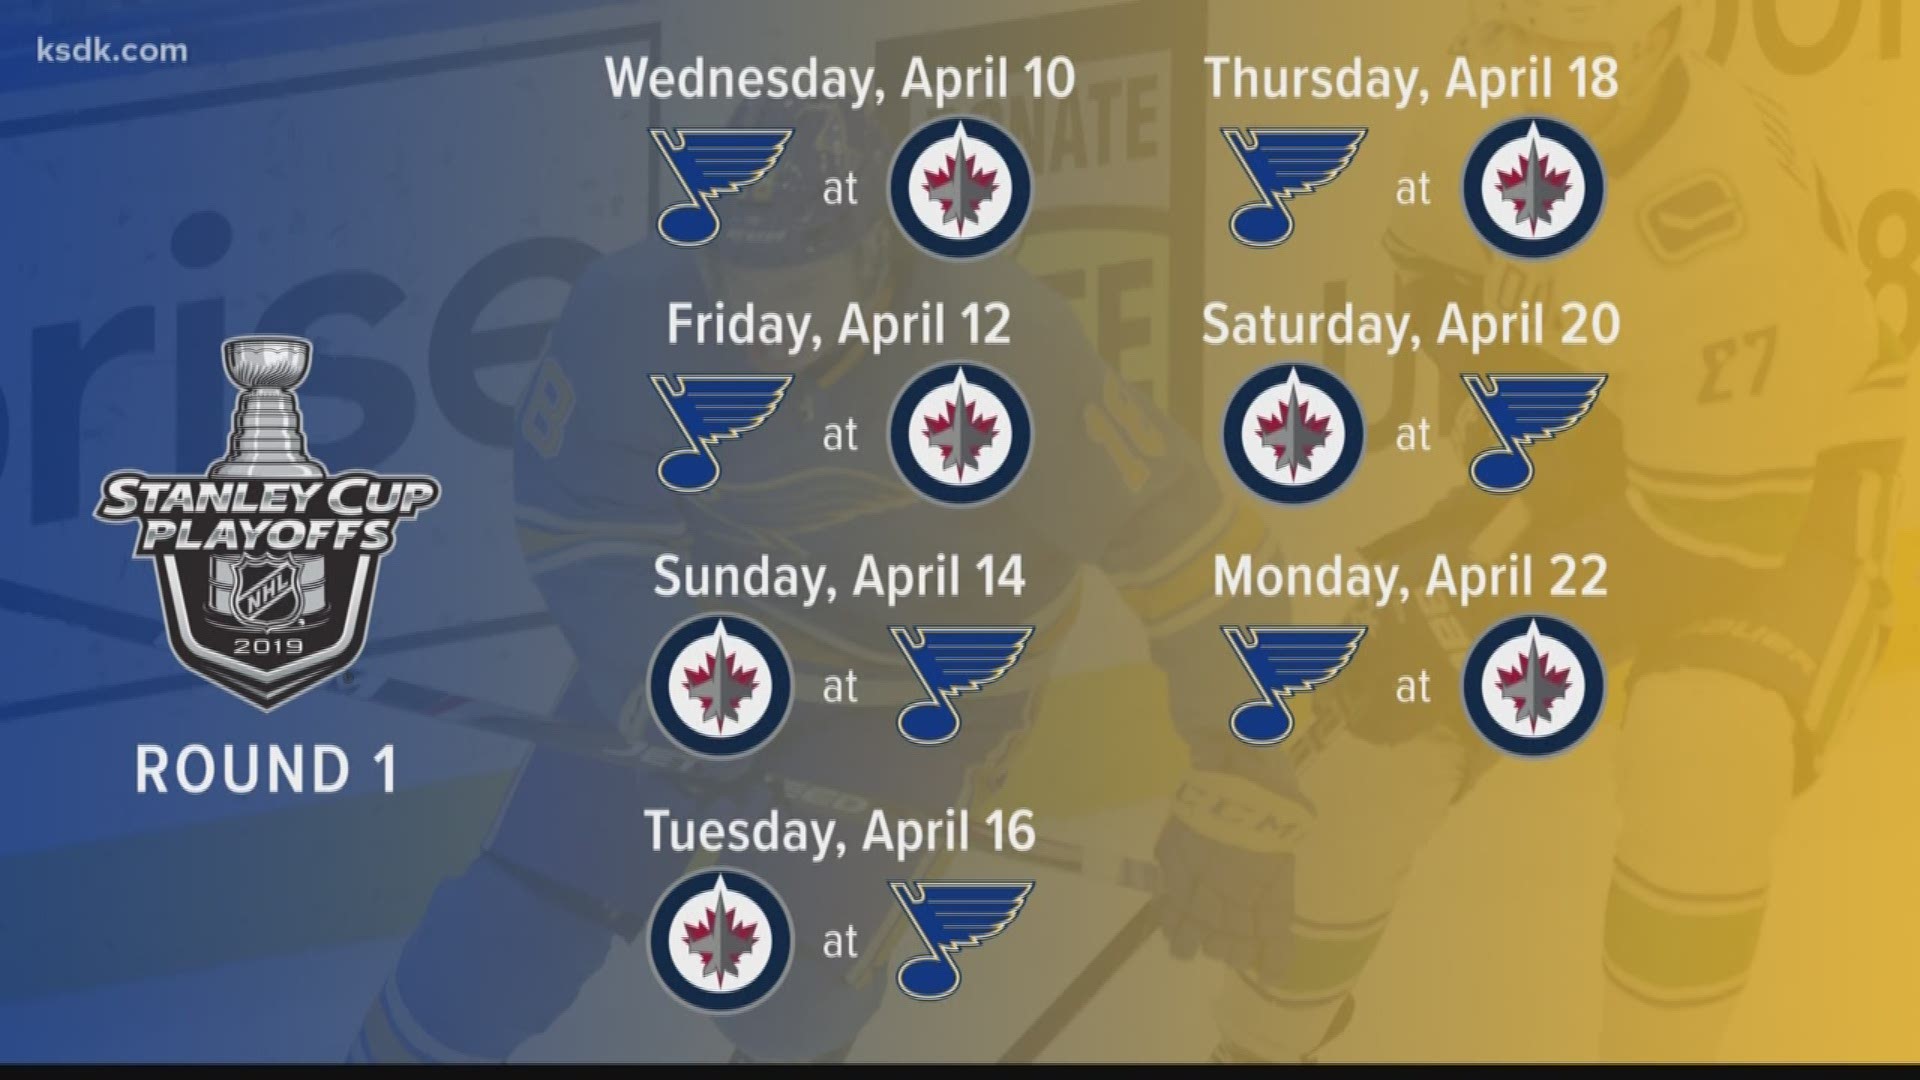 The dates for the Blues first-round series against the Winnipeg Jets have been announced.